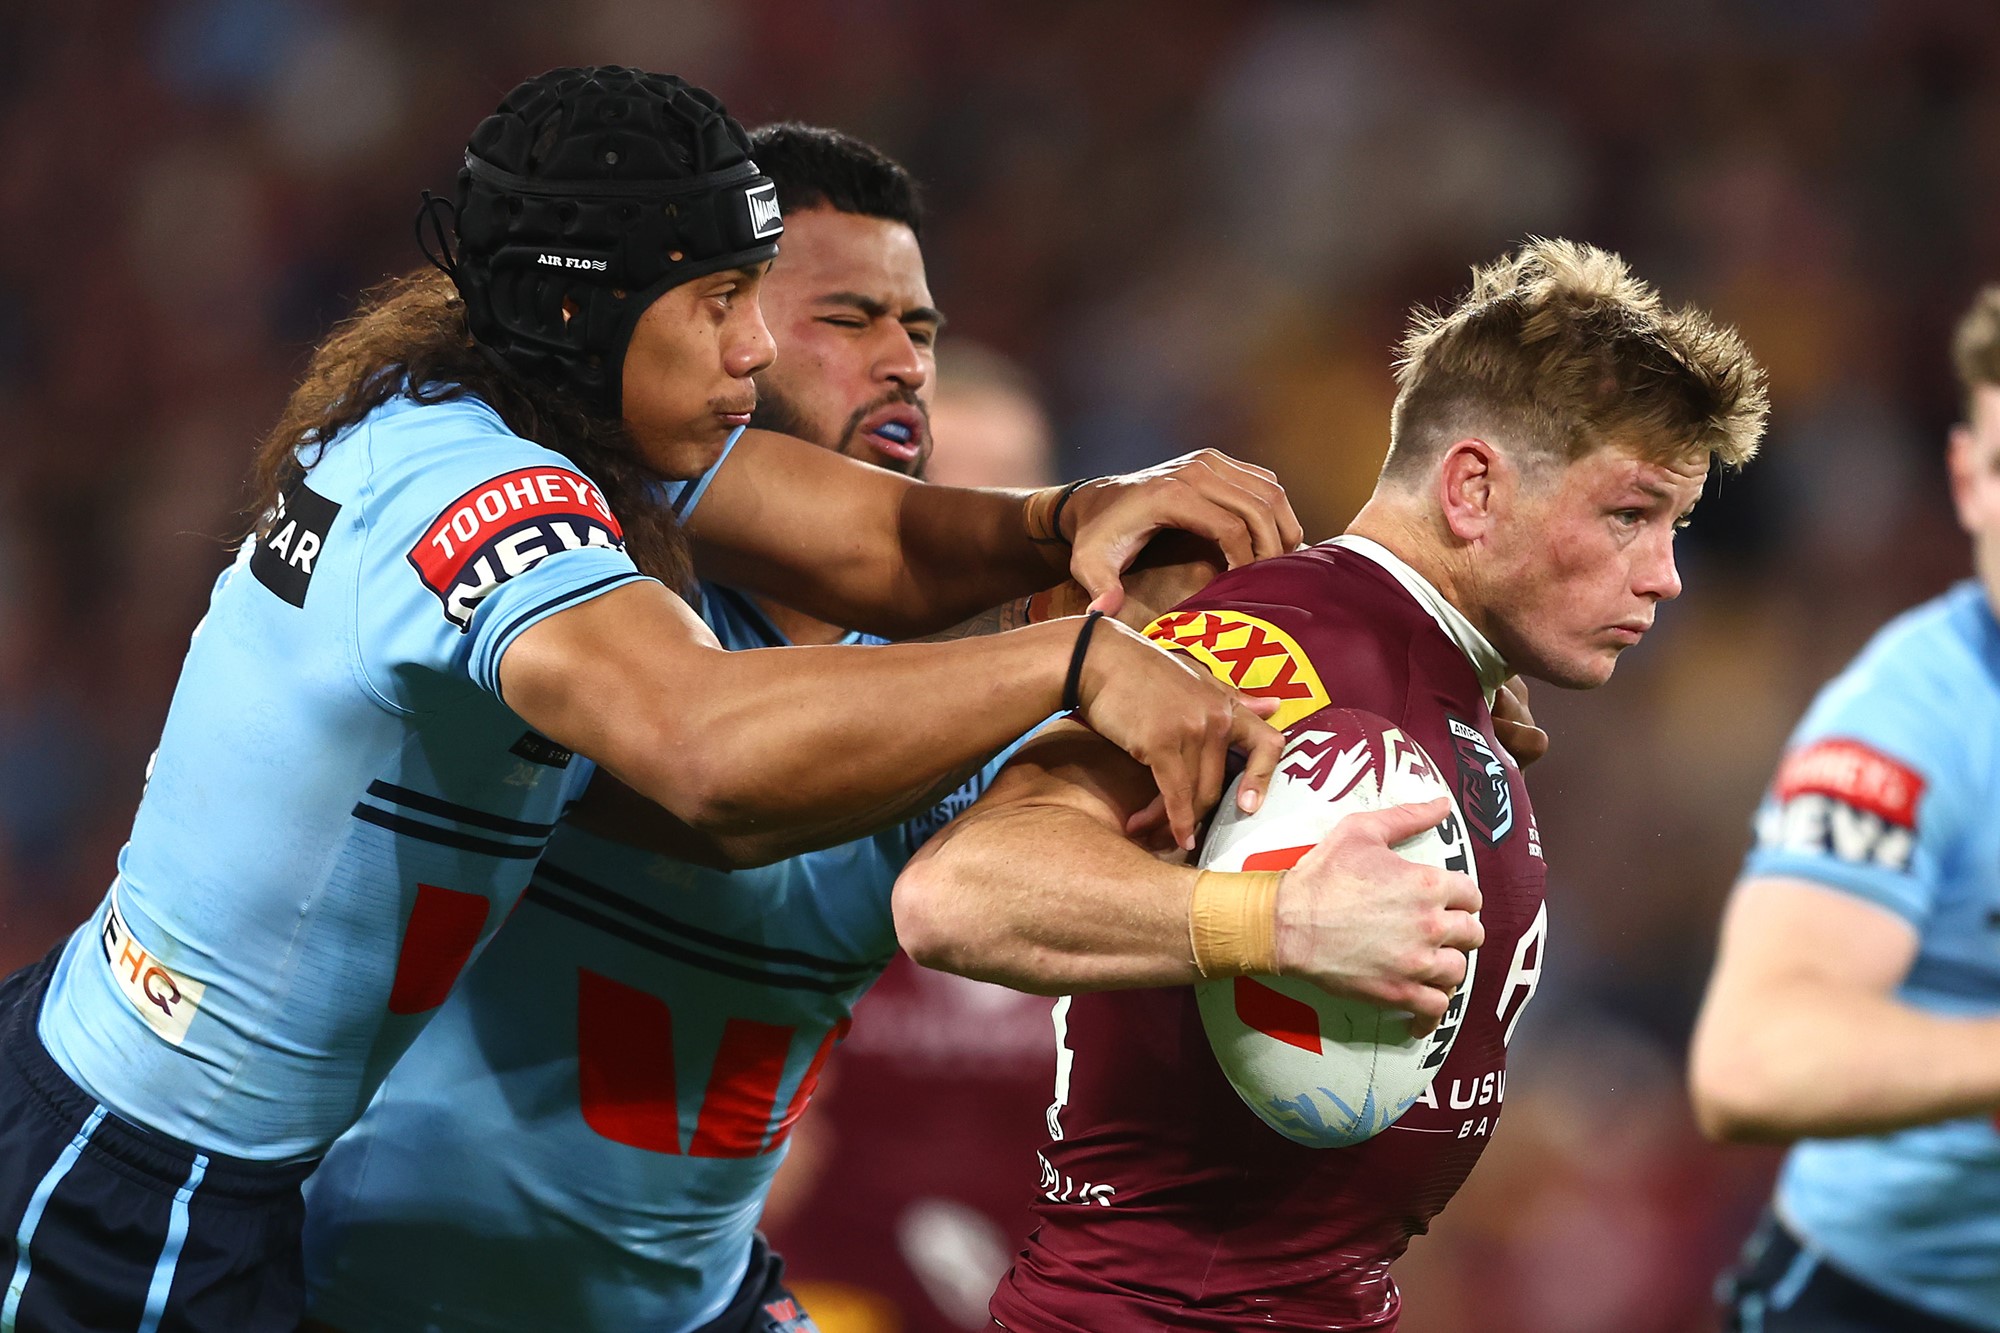 New South Wales Blues avoid State of Origin series whitewash with 24-10 victory over Queensland Maroons in Sydney